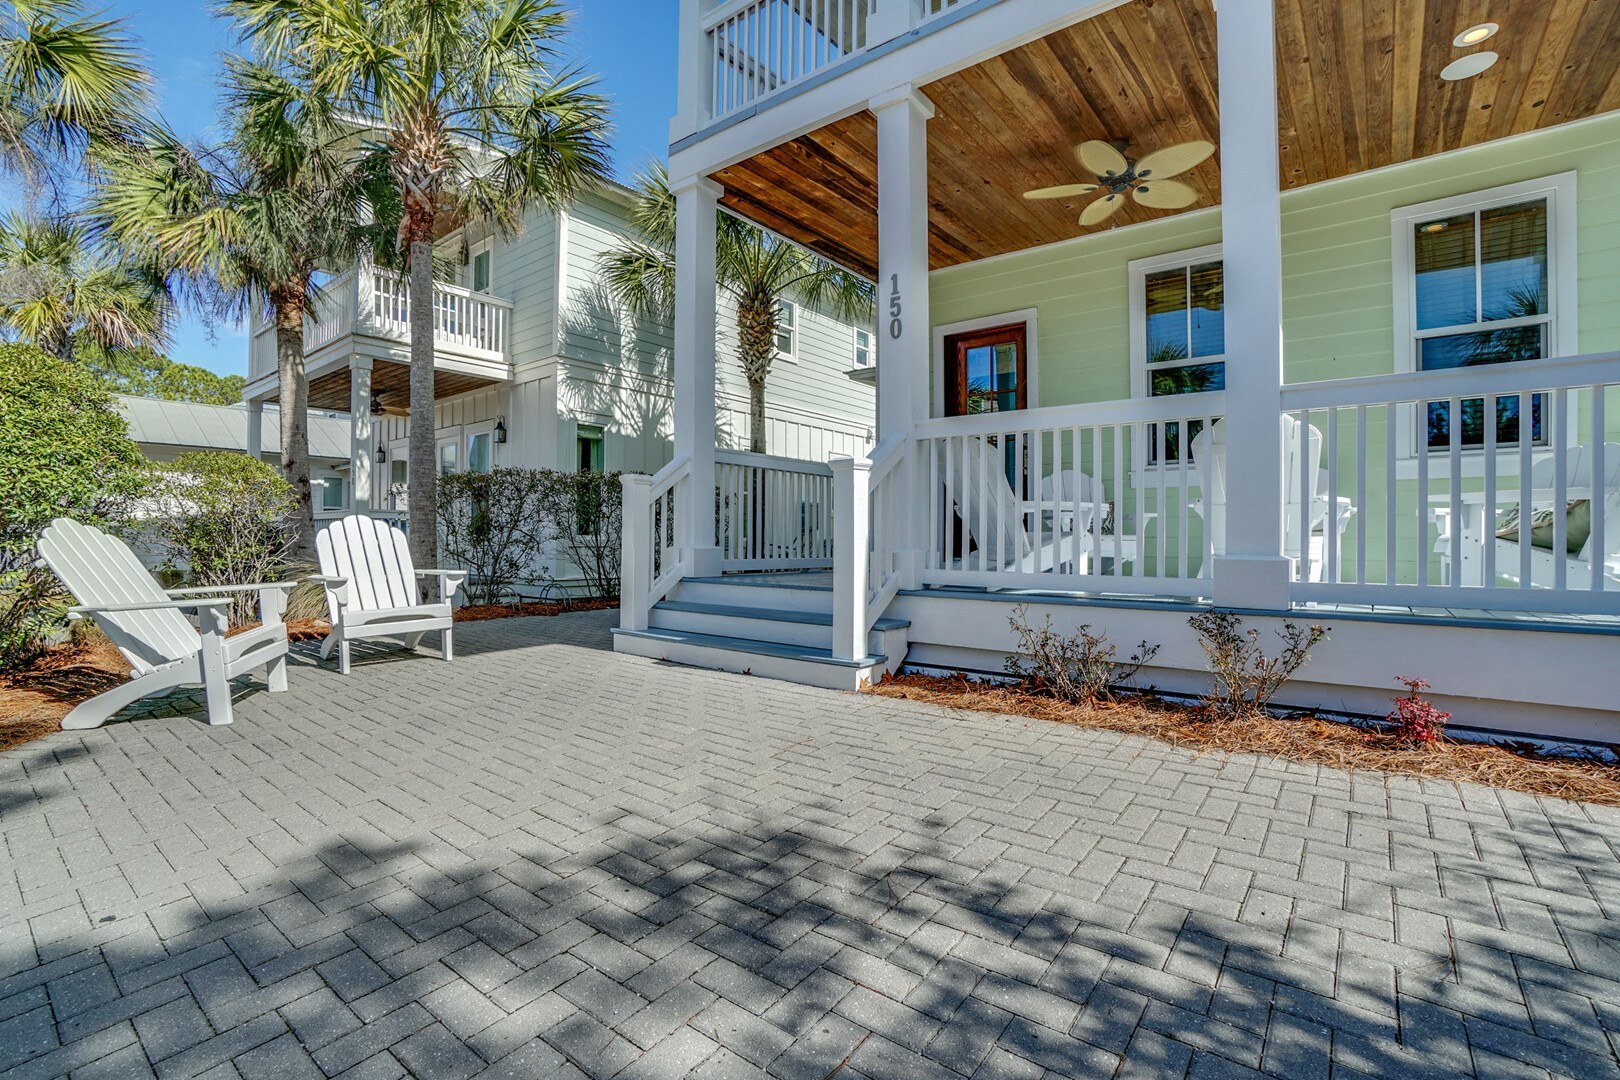  30A's Most Inviting Home in Seacrest, FL